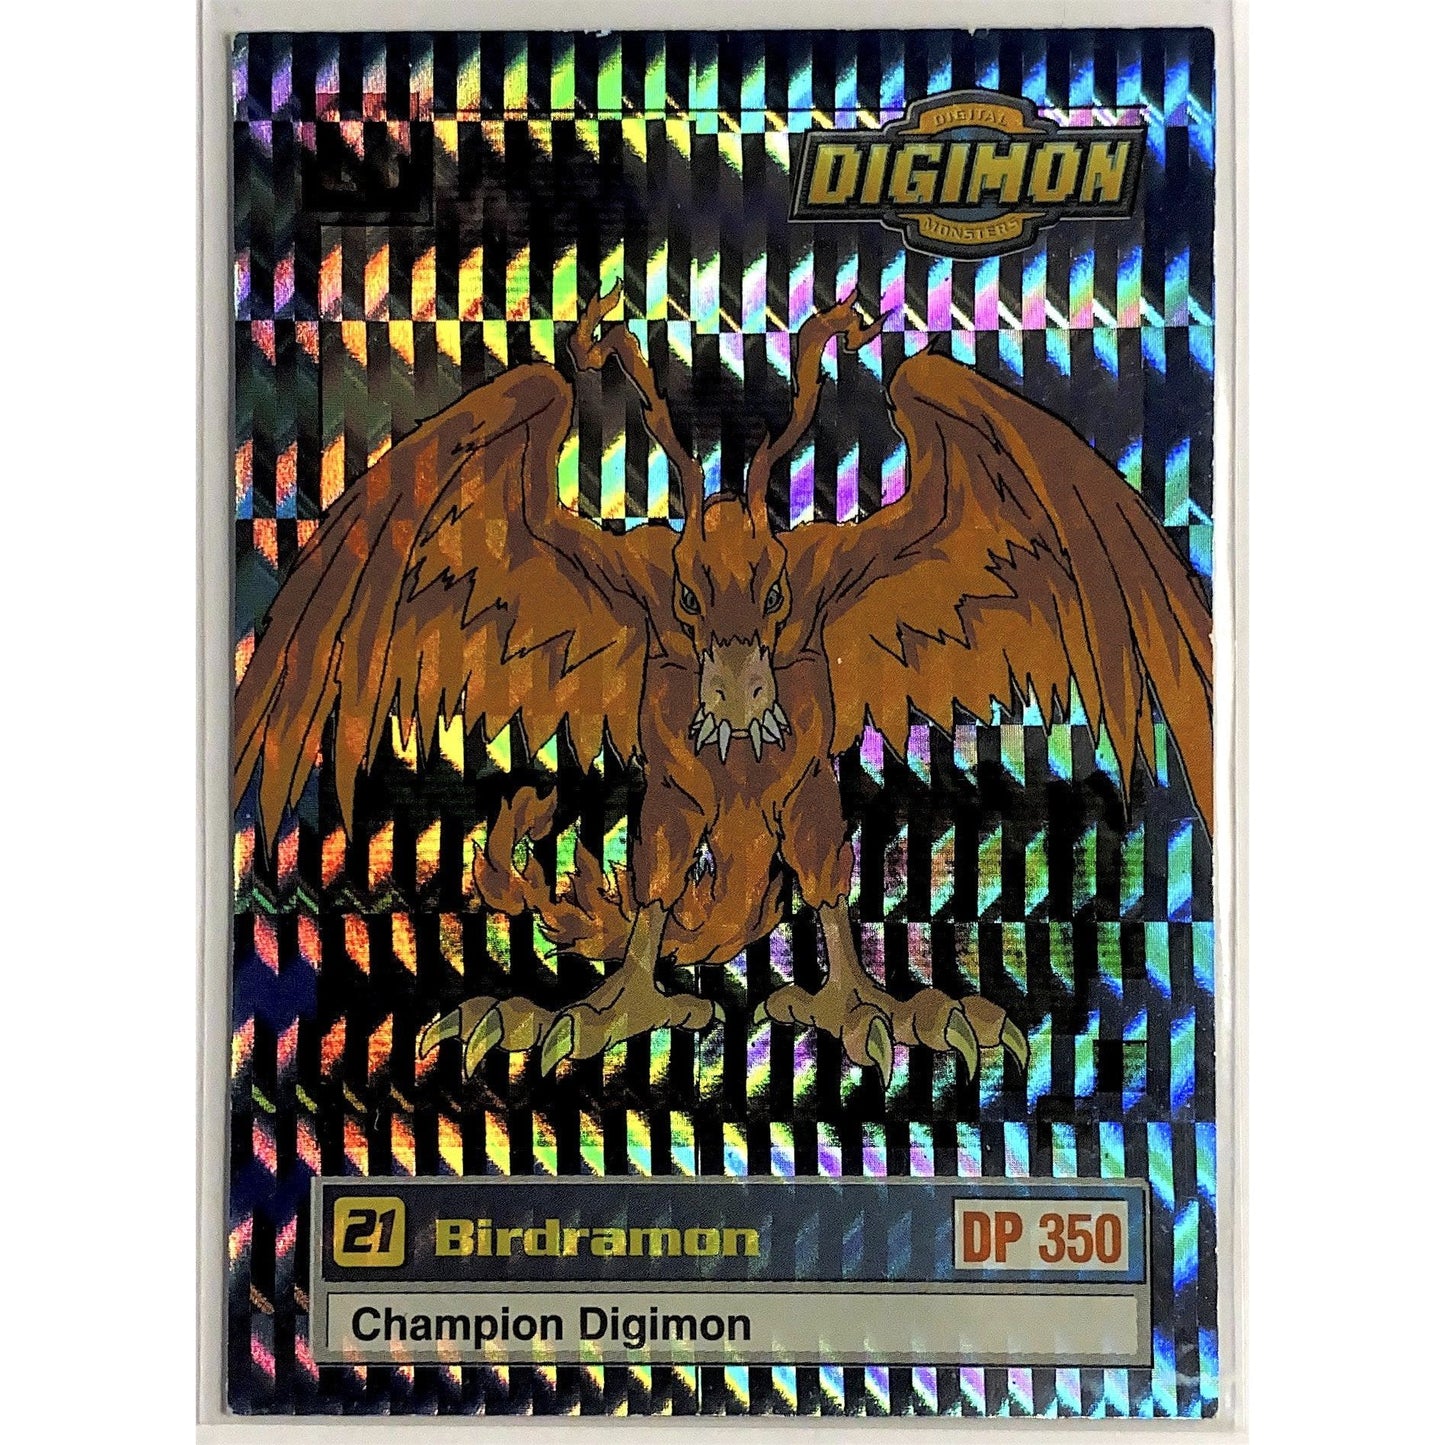  1999 Digimon Birdramon Holo Prizm 23 of 34  Local Legends Cards & Collectibles